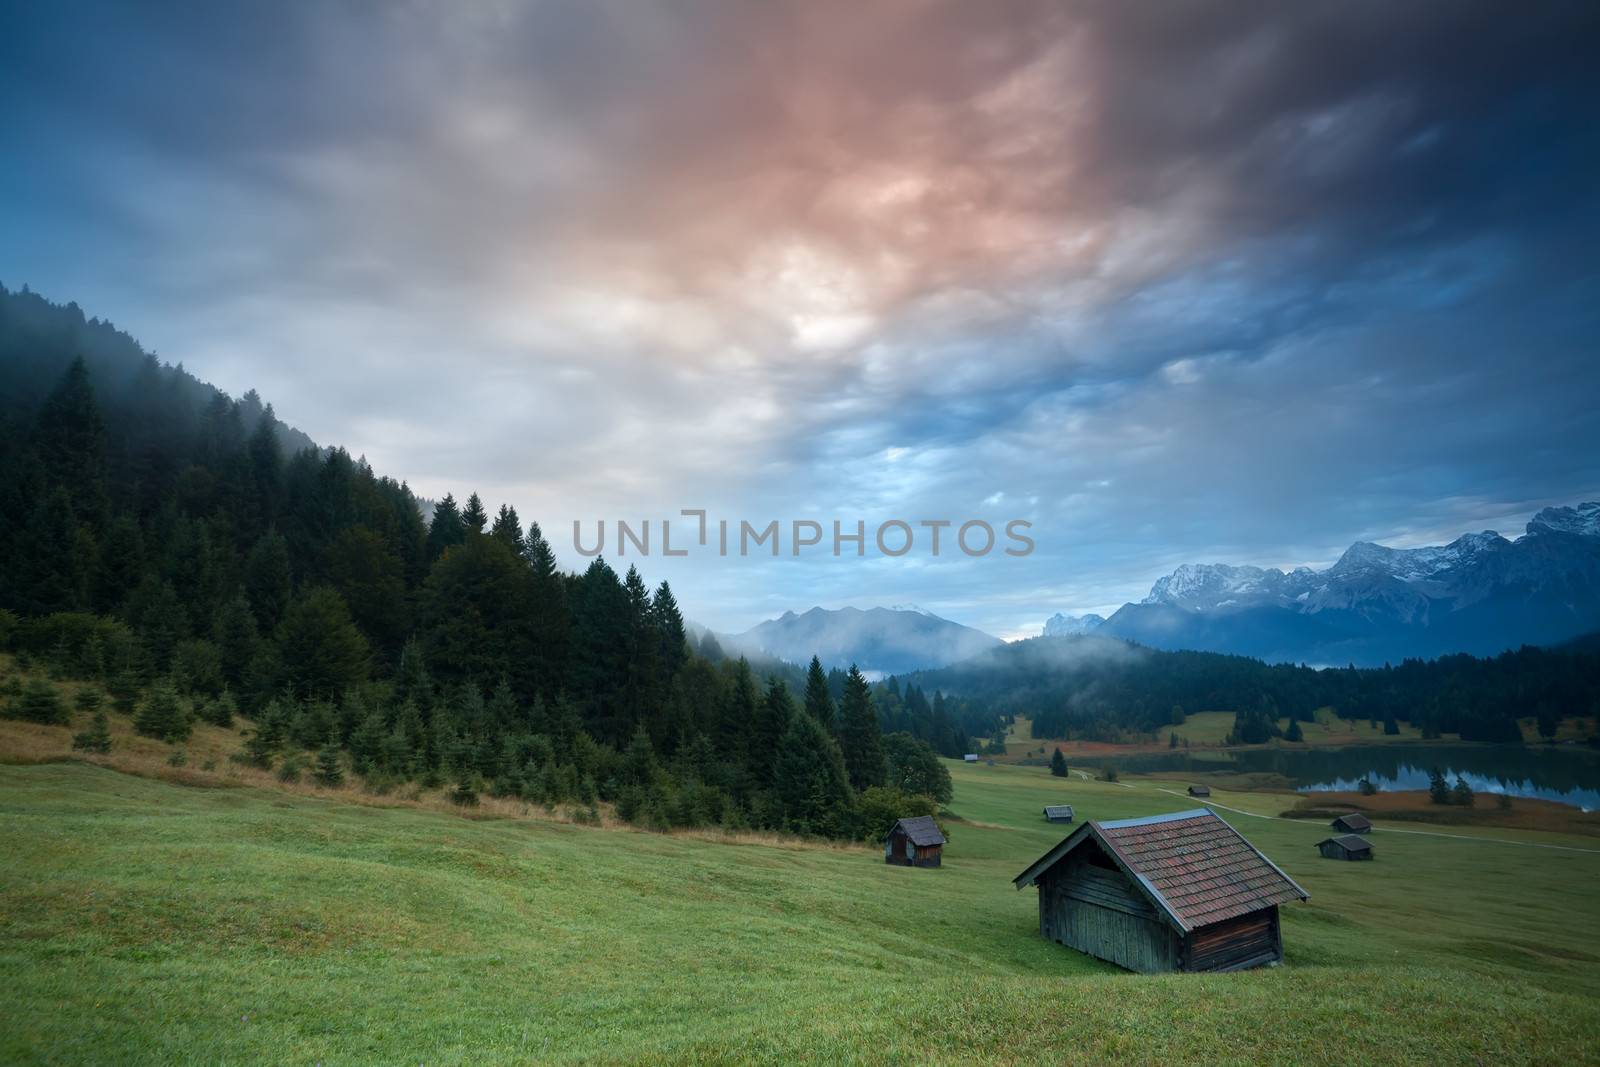 misty sunrise over huts by Geroldsee lake in Bavarian Alps, Germany